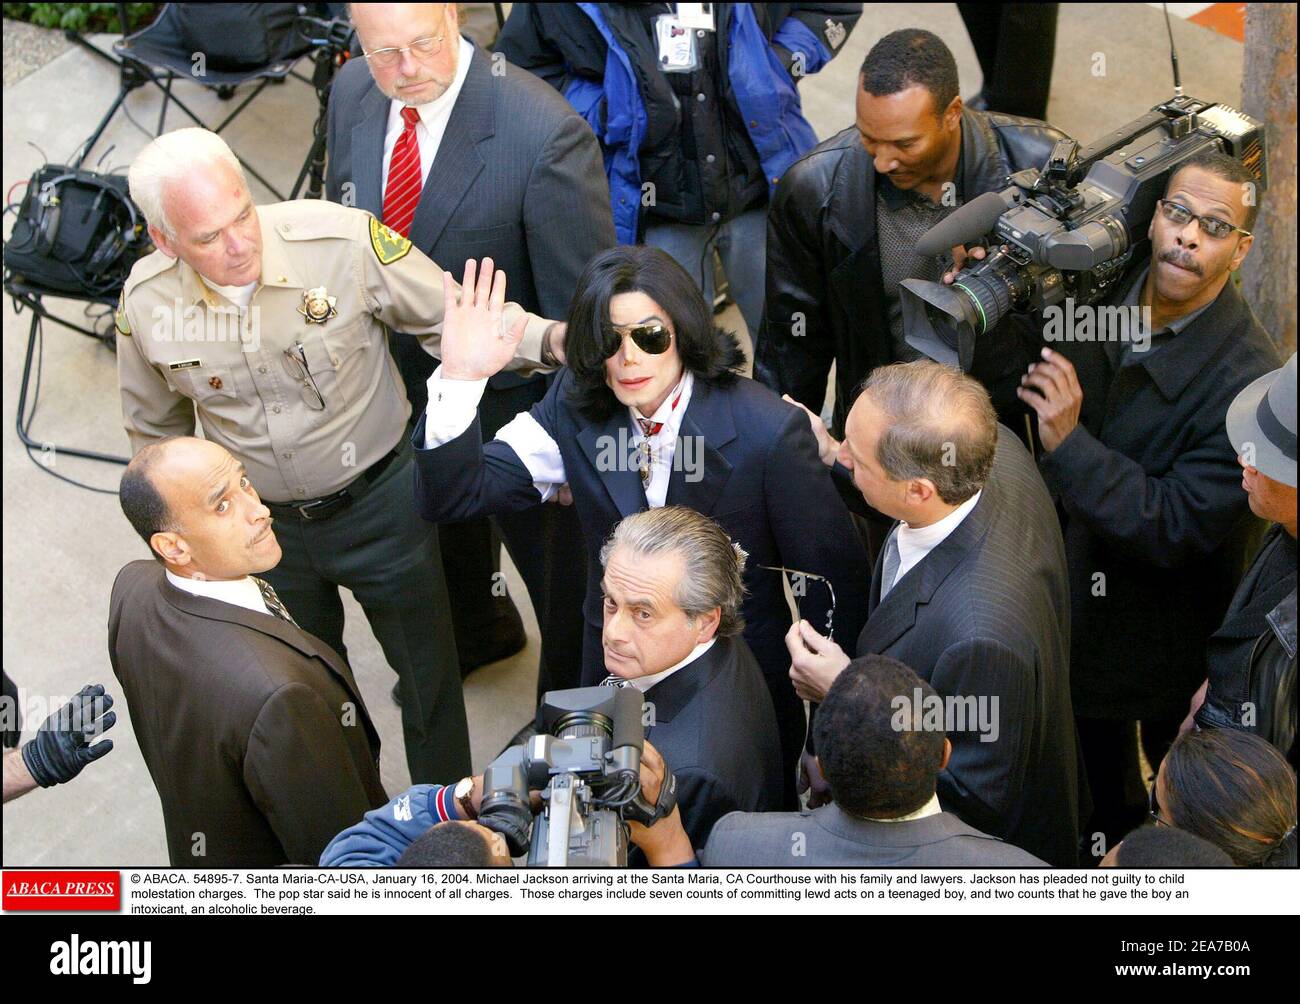 © ABACA. 54895-7. Santa Maria-CA-USA, January 16, 2004. Michael Jackson arriving at the Santa Maria, CA Courthouse with his family and lawyers. Jackson has pleaded not guilty to child molestation charges. The pop star said he is innocent of all charges. Those charges include seven counts of committing lewd acts on a teenaged boy, and two counts that he gave the boy an intoxicant, an alcoholic beverage. Stock Photo